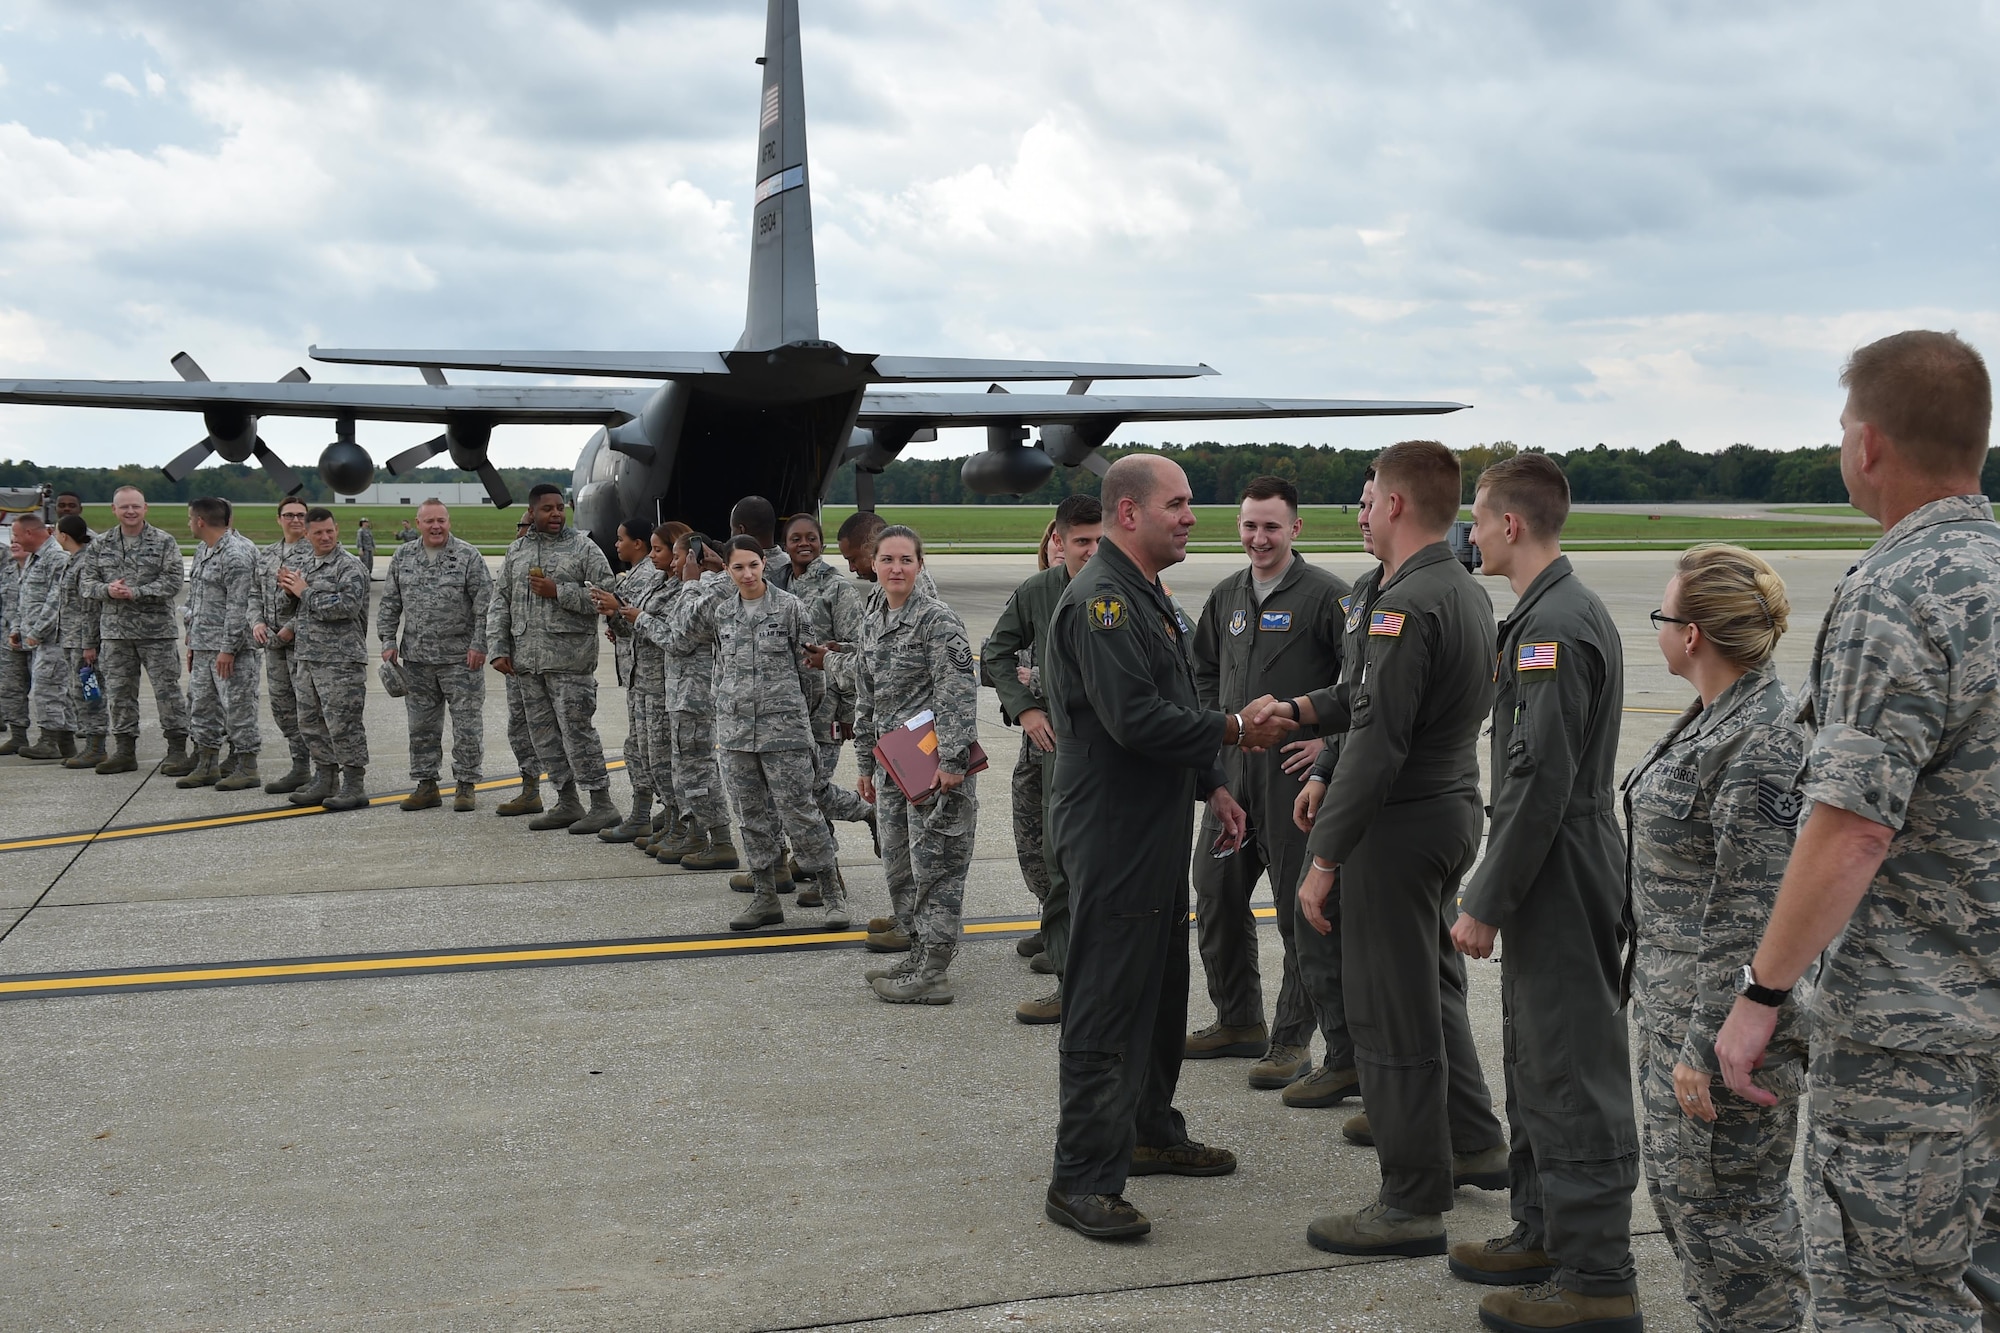 Col. James Dignan, 910th Airlift Wing commander, greets 910th Airlift Wing members after his final flight with the unit here, Oct. 2, 2016. Dignan moved to a new assignment at the Pentagon Oct. 18, after commanding YARS for nearly four years. (U.S. Air Force photo/Tech. Sgt. Jim Brock)